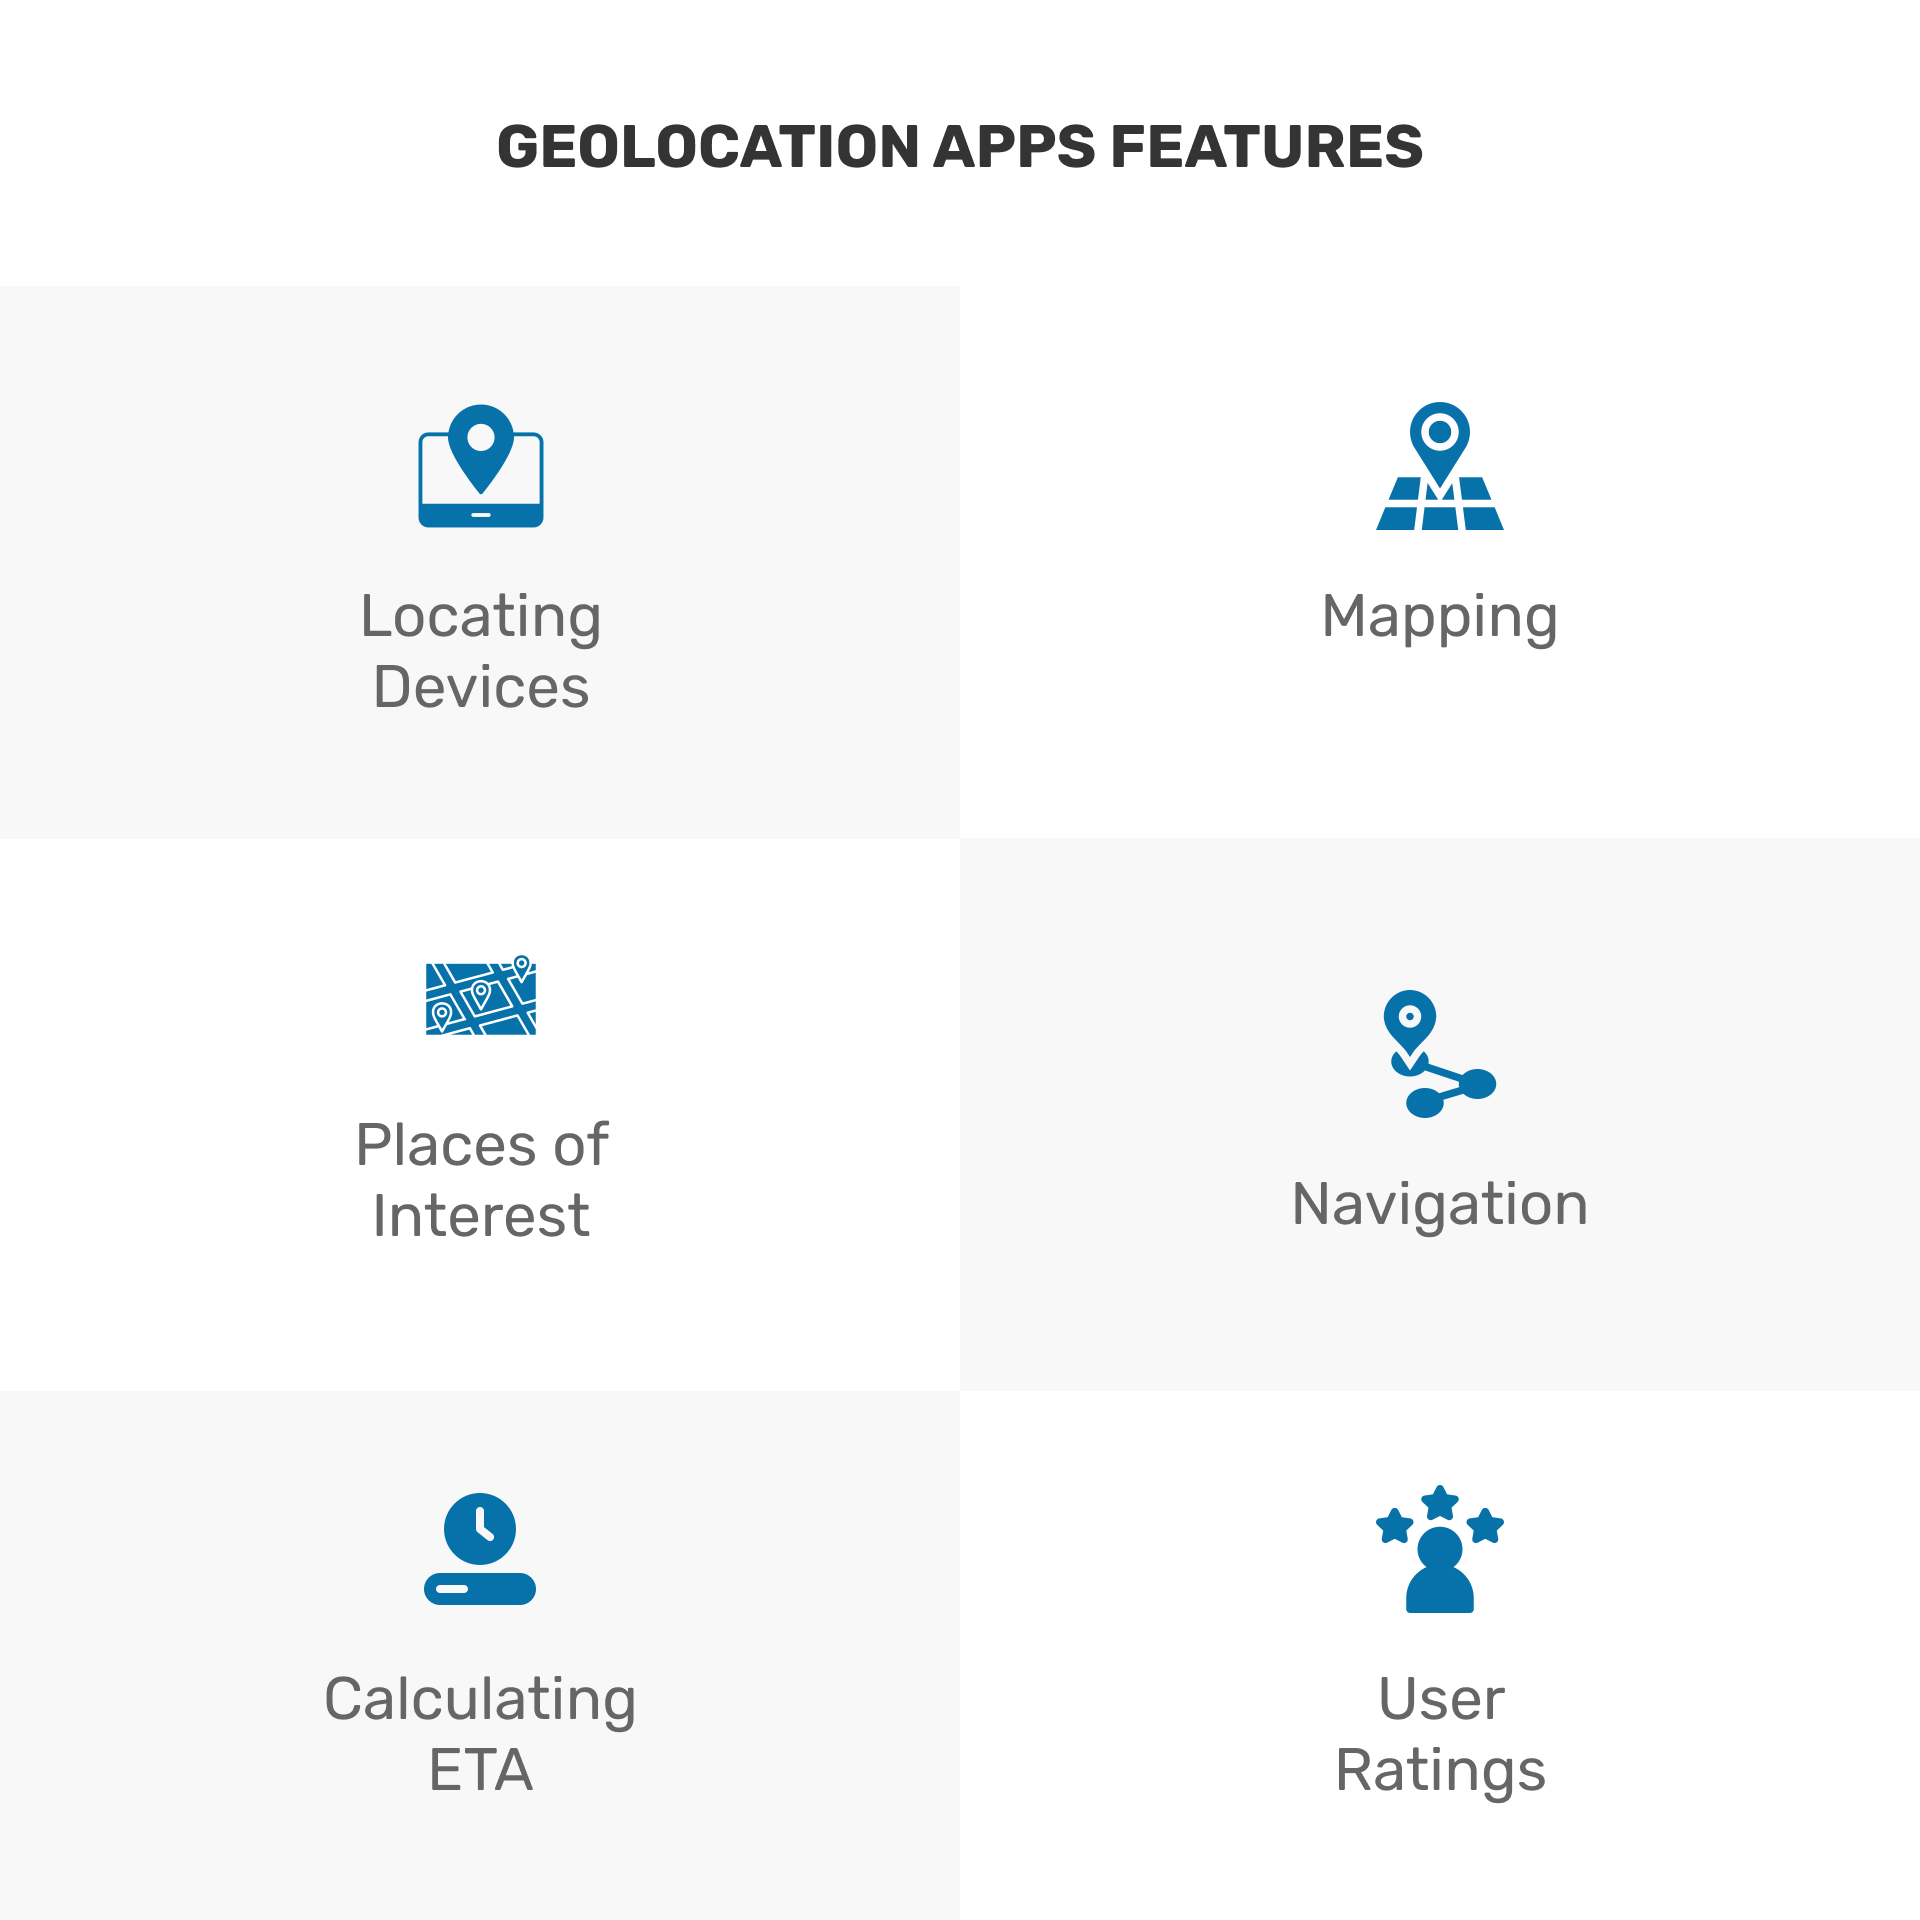 Locating devices, mapping, navigation, and other features are essential for any geolocation app.